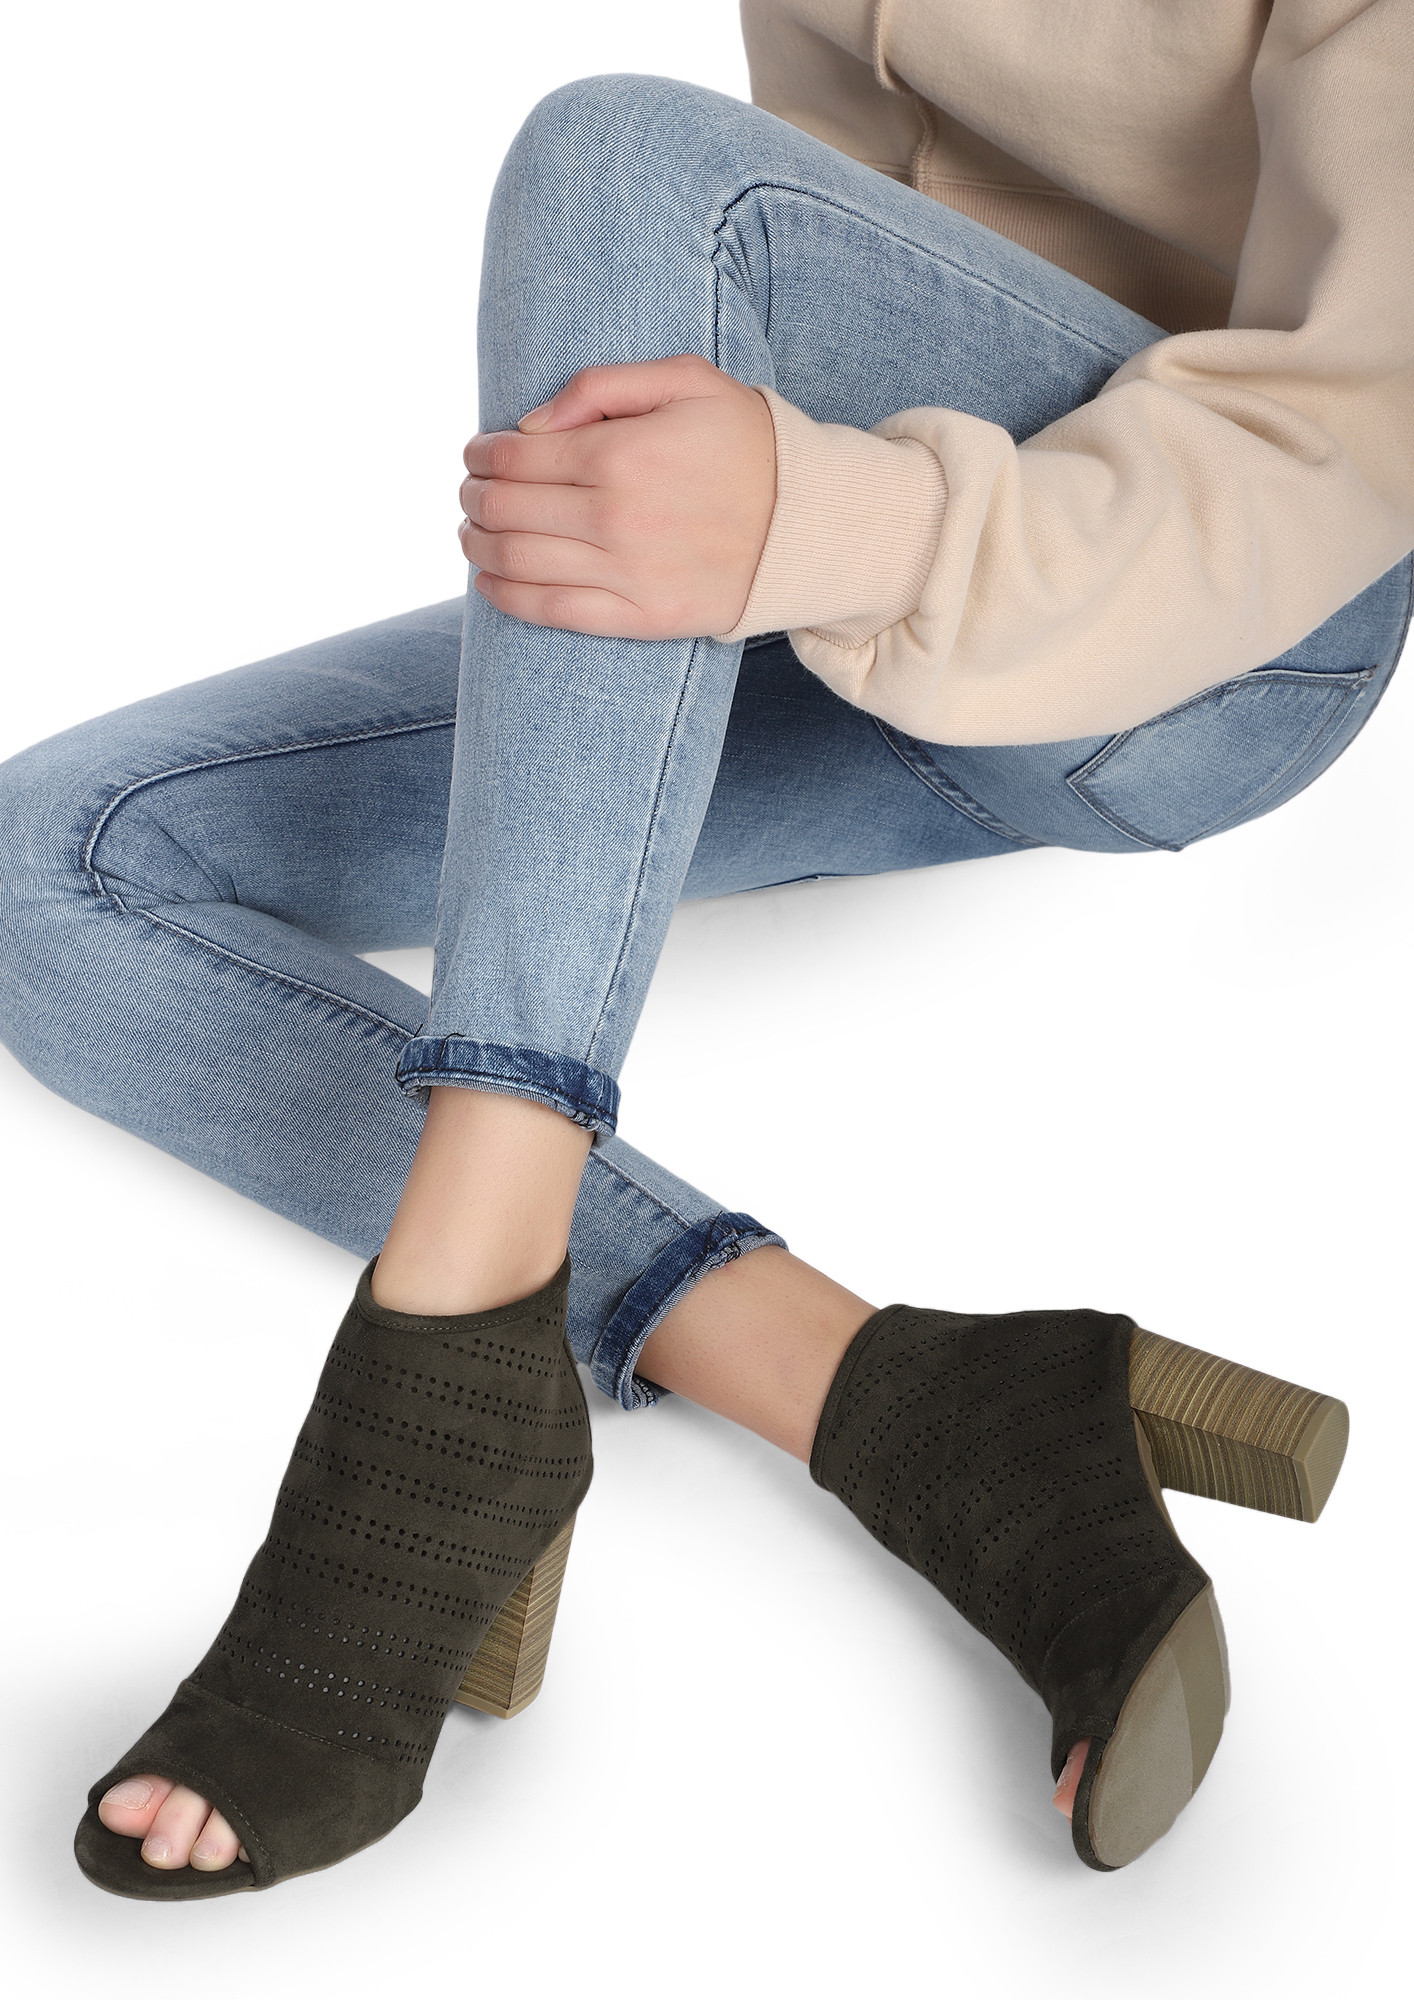 HEADING TO THE NEVERLAND OLIVE GREEN PEEP-TOE BOOTS